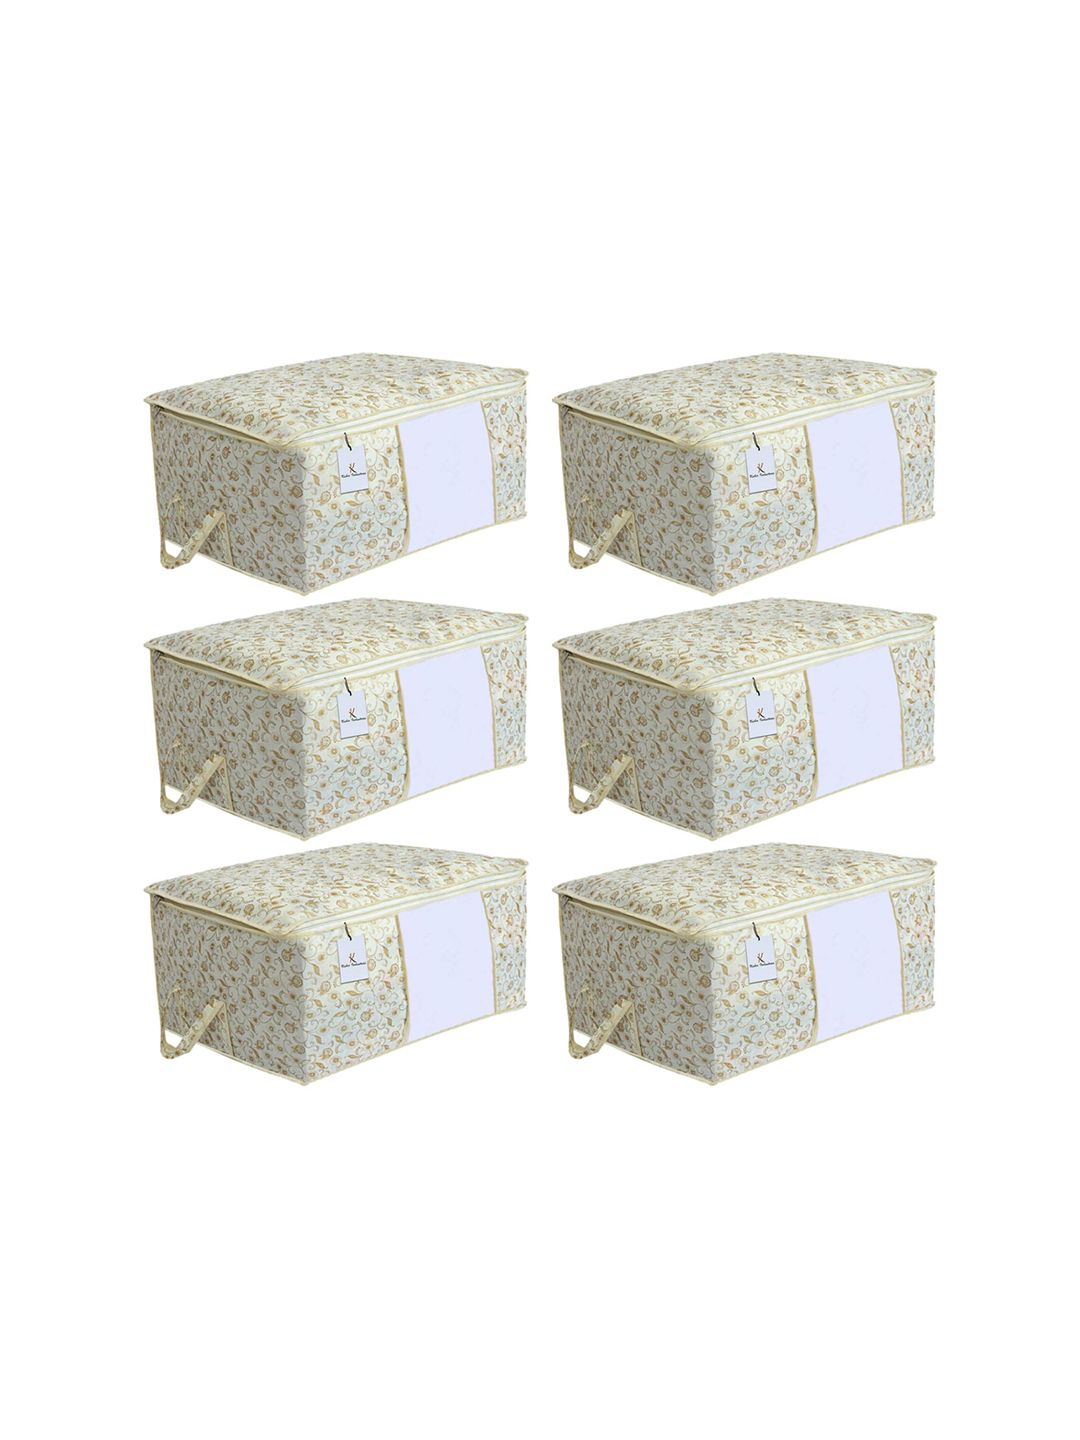 Kuber Industries Set Of 6 White & Brown Metallic Printed Underbed Storage Bags With Transparent Window Price in India